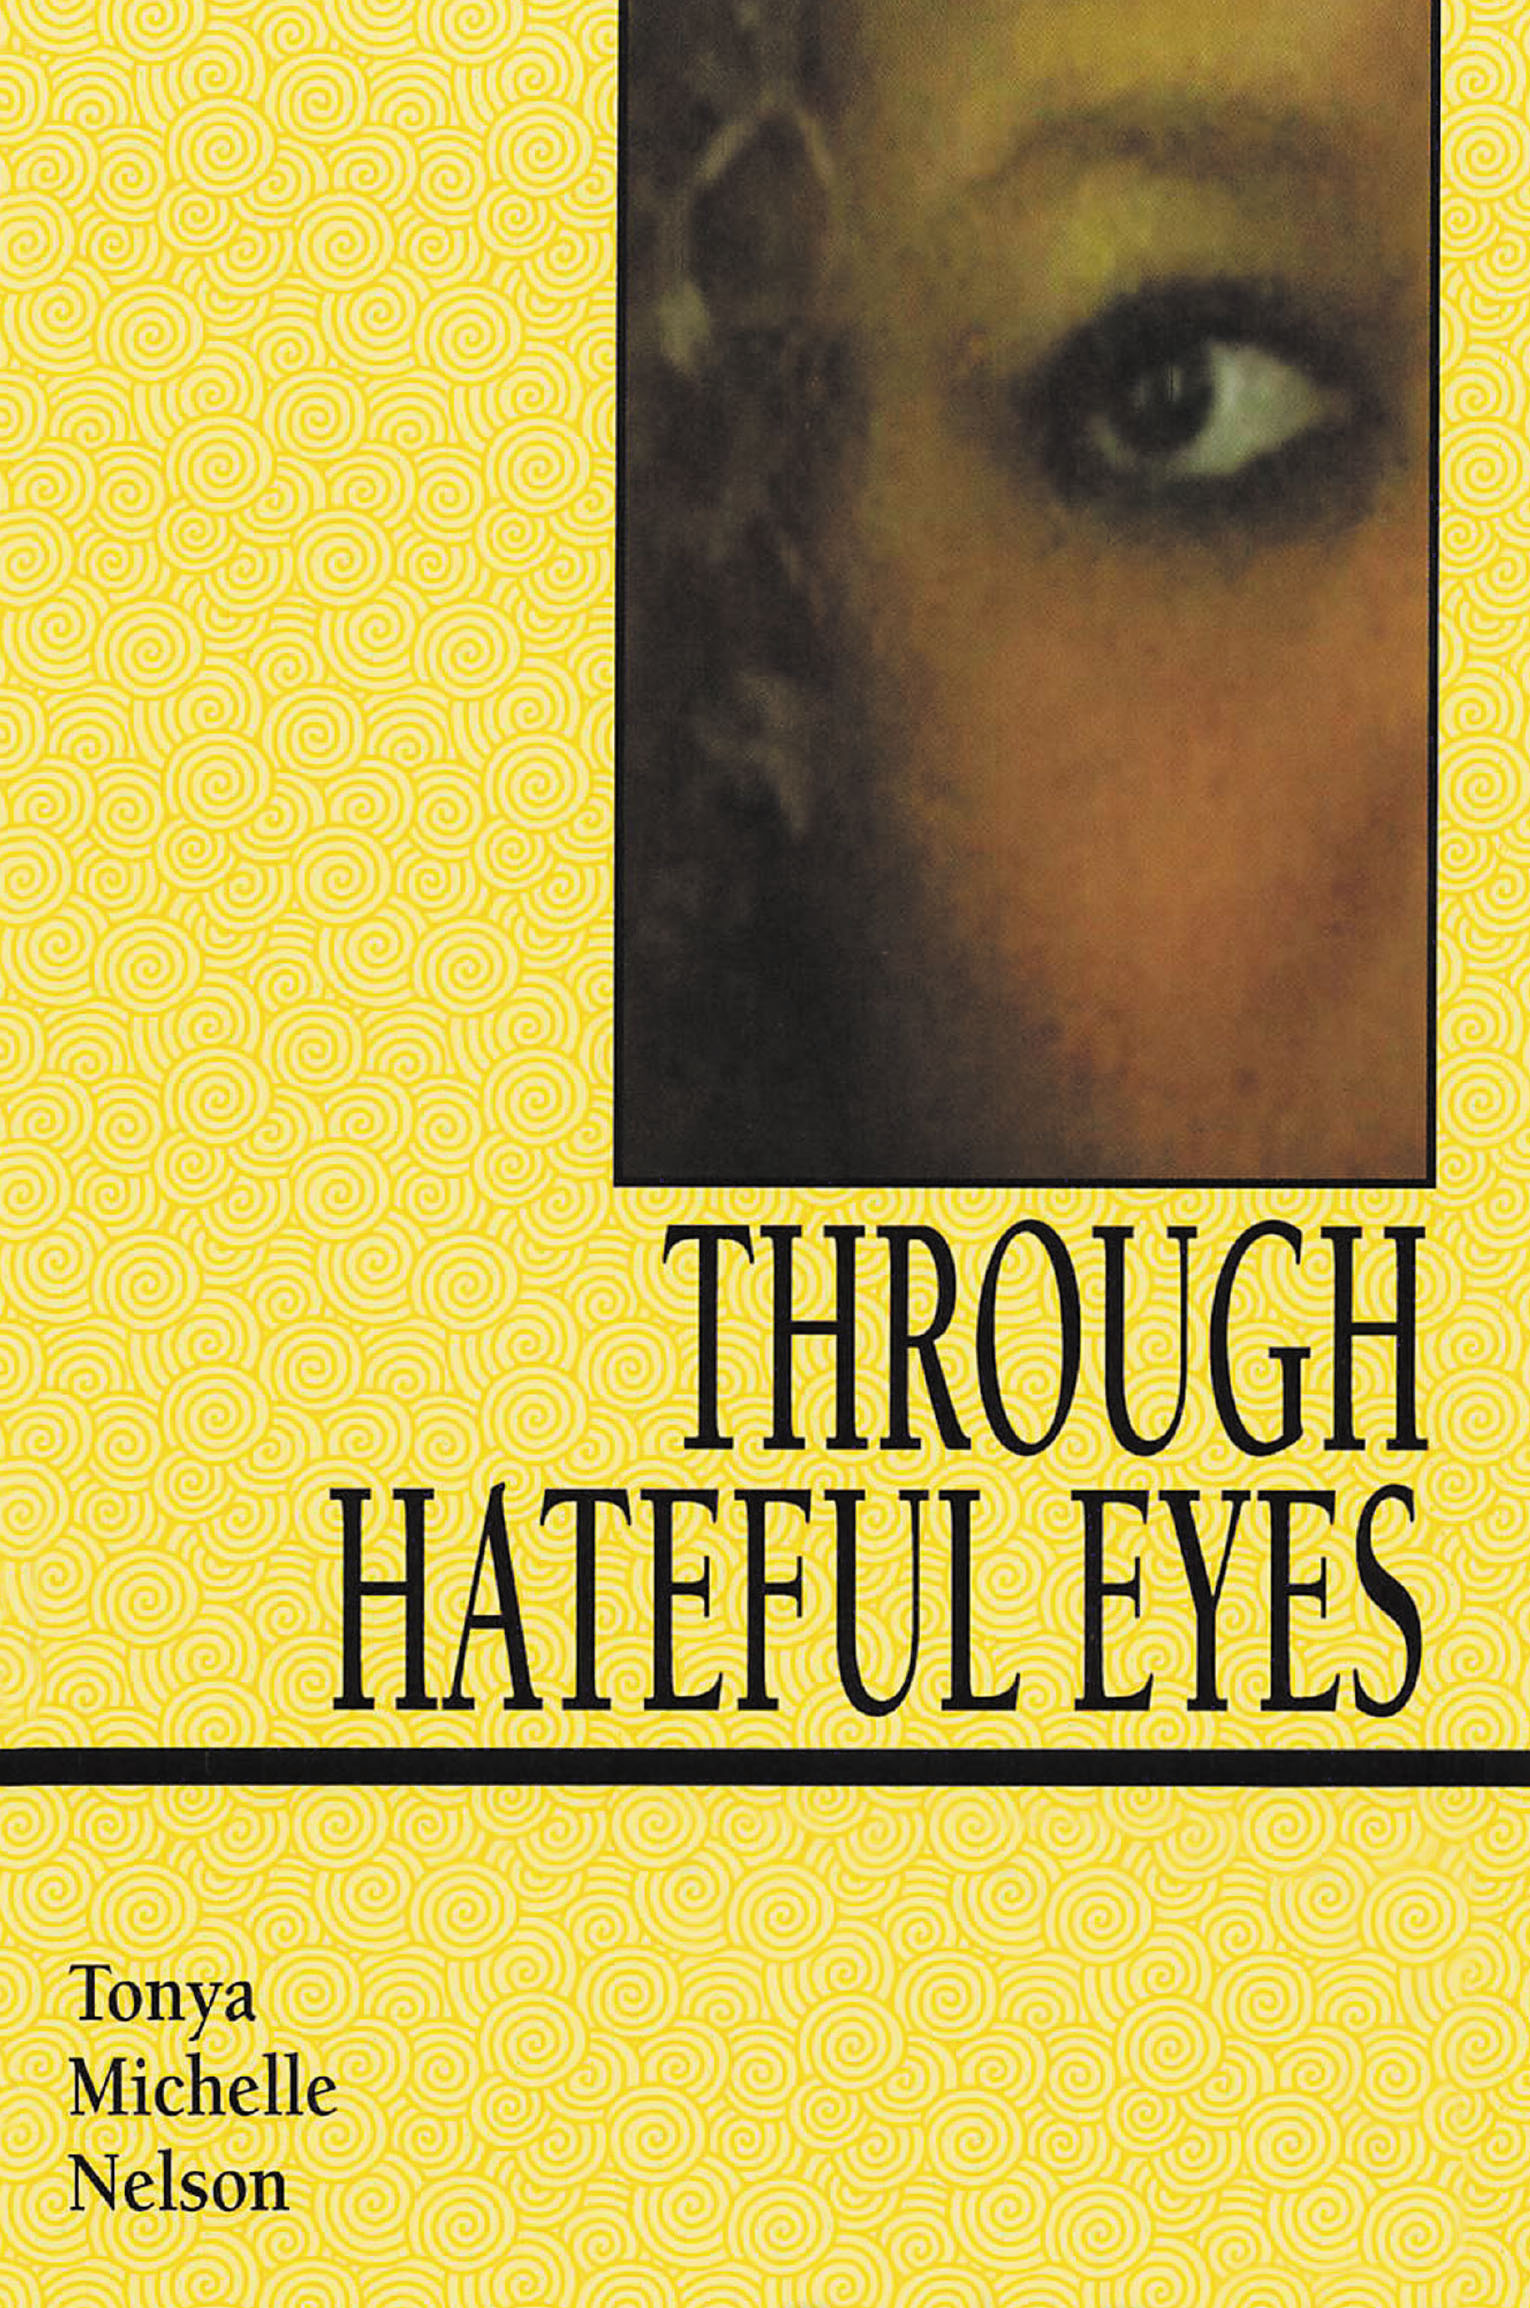 Author Tonya Michelle Nelson’s New Book "Through Hateful Eyes" Explores How the Author Managed to Rebuild Herself After Every Struggle and Trial She Was Forced to Endure